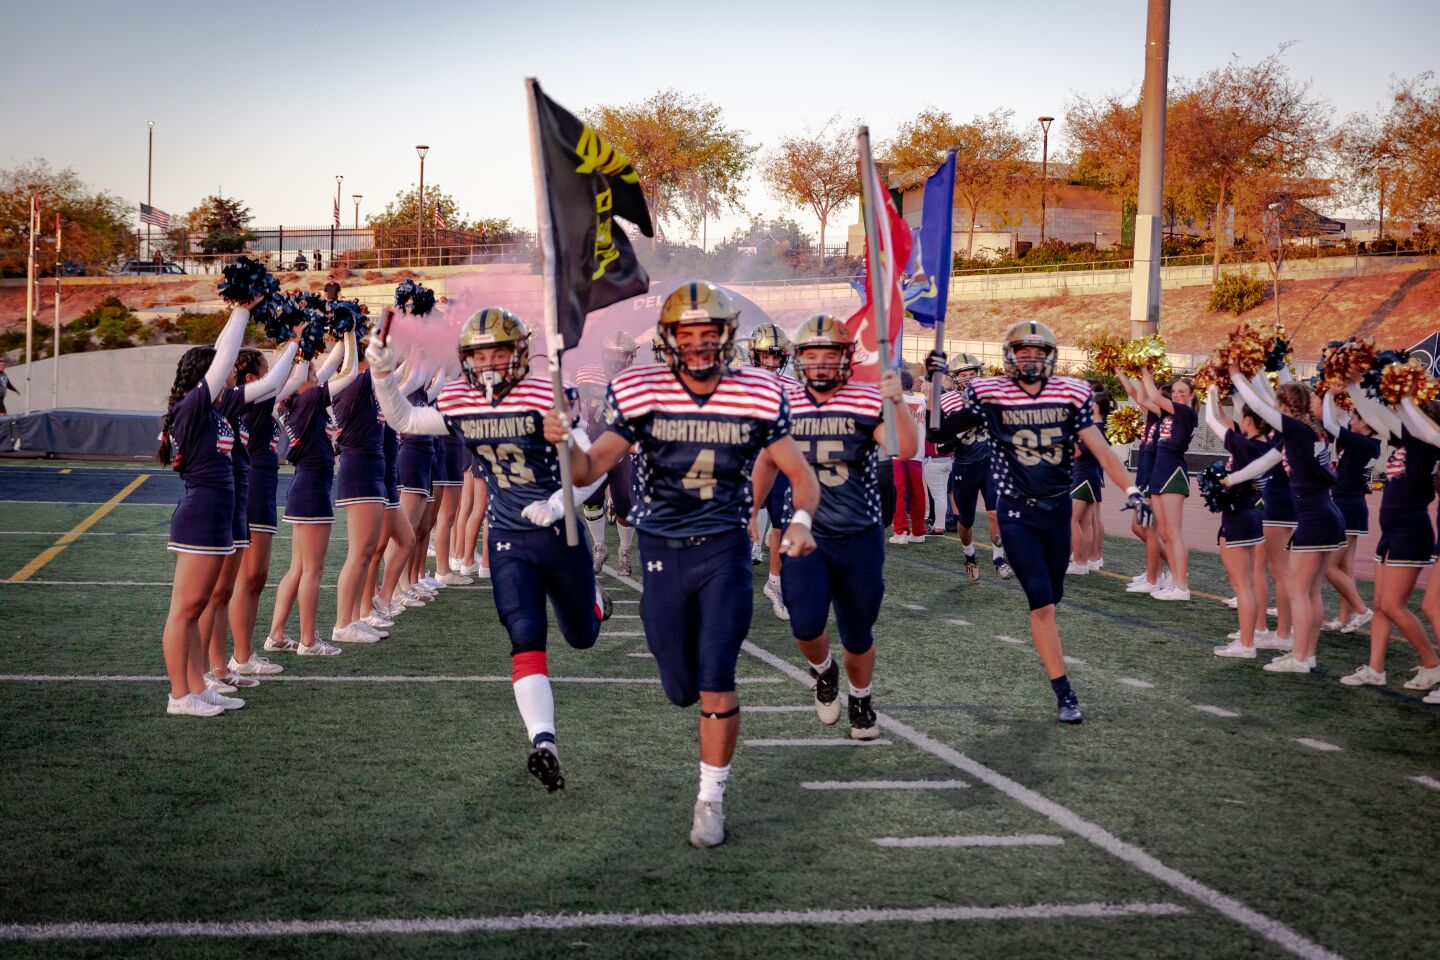 Players Khalid Farah (4), Kyle Stephenson (13), Mason Gizicki (55), Ryan Goldstein (85), run out of the tunnel holding flags representing each branch of the military and Navy, and red, white, and blue smoke grenades.